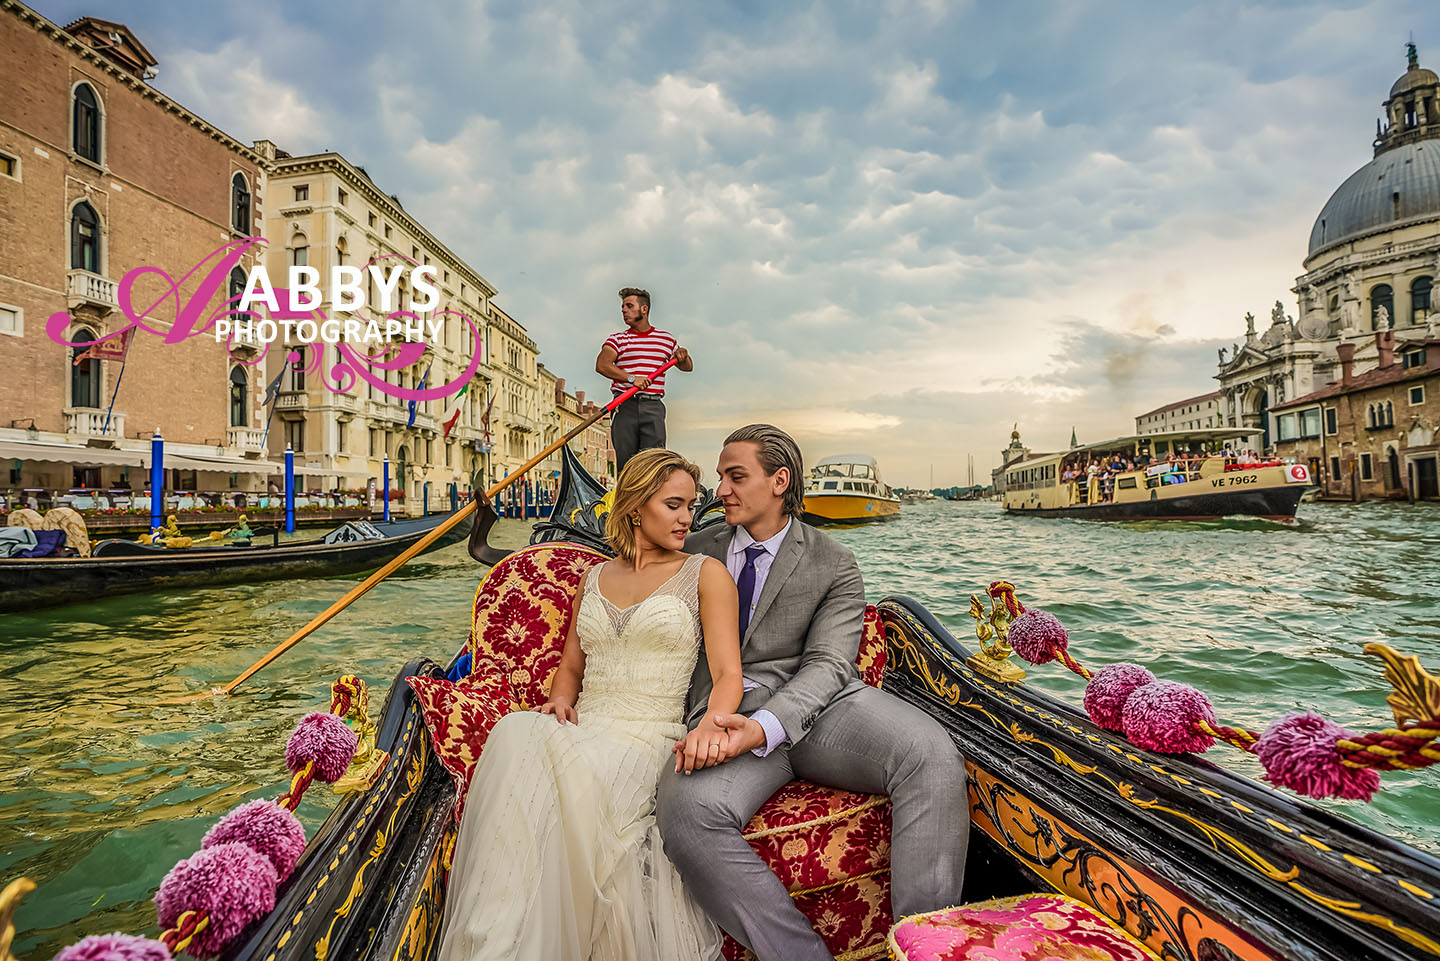 Abbys Photography can make you feel like your wedding or engagement is in Venice instead of Antelope Valley. Call 661-342-4945  